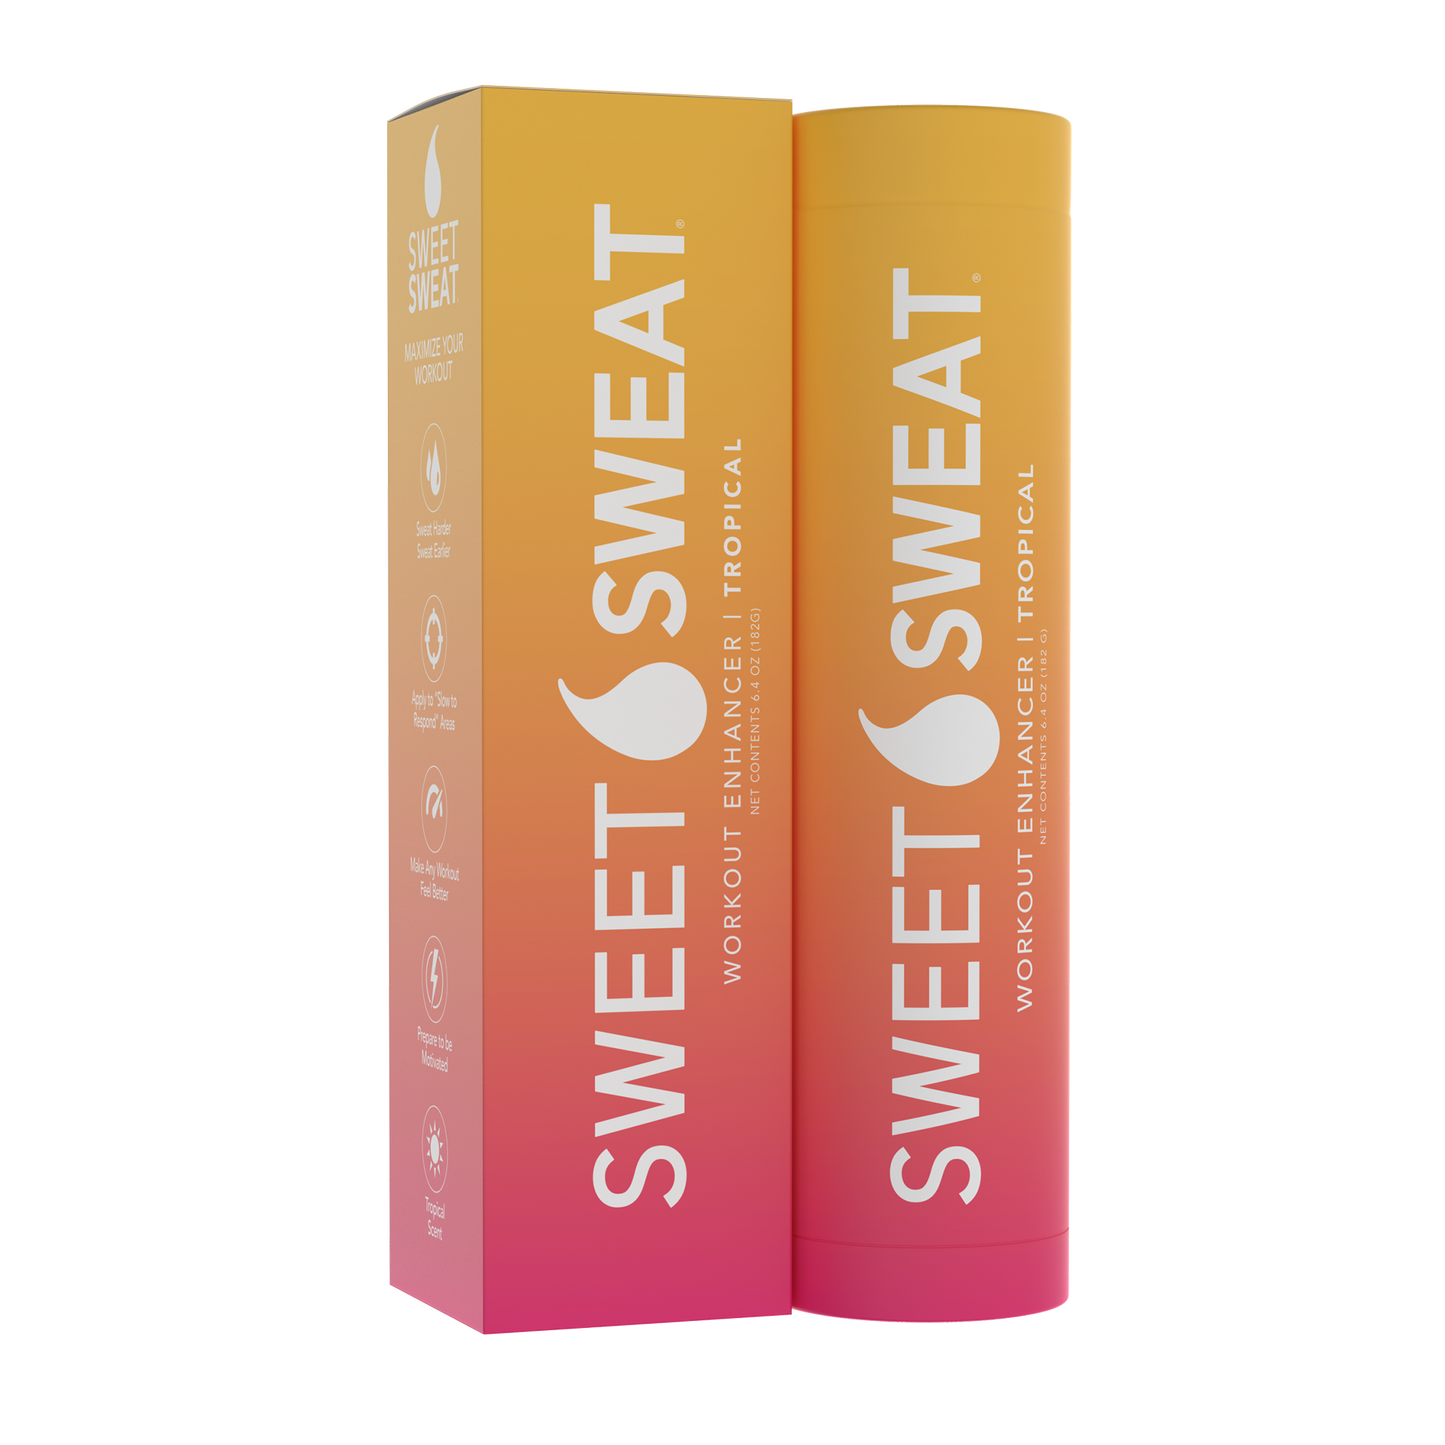 a box of Sweet Sweat® Stick 6.4 oz - Tropical with a pink and orange design.